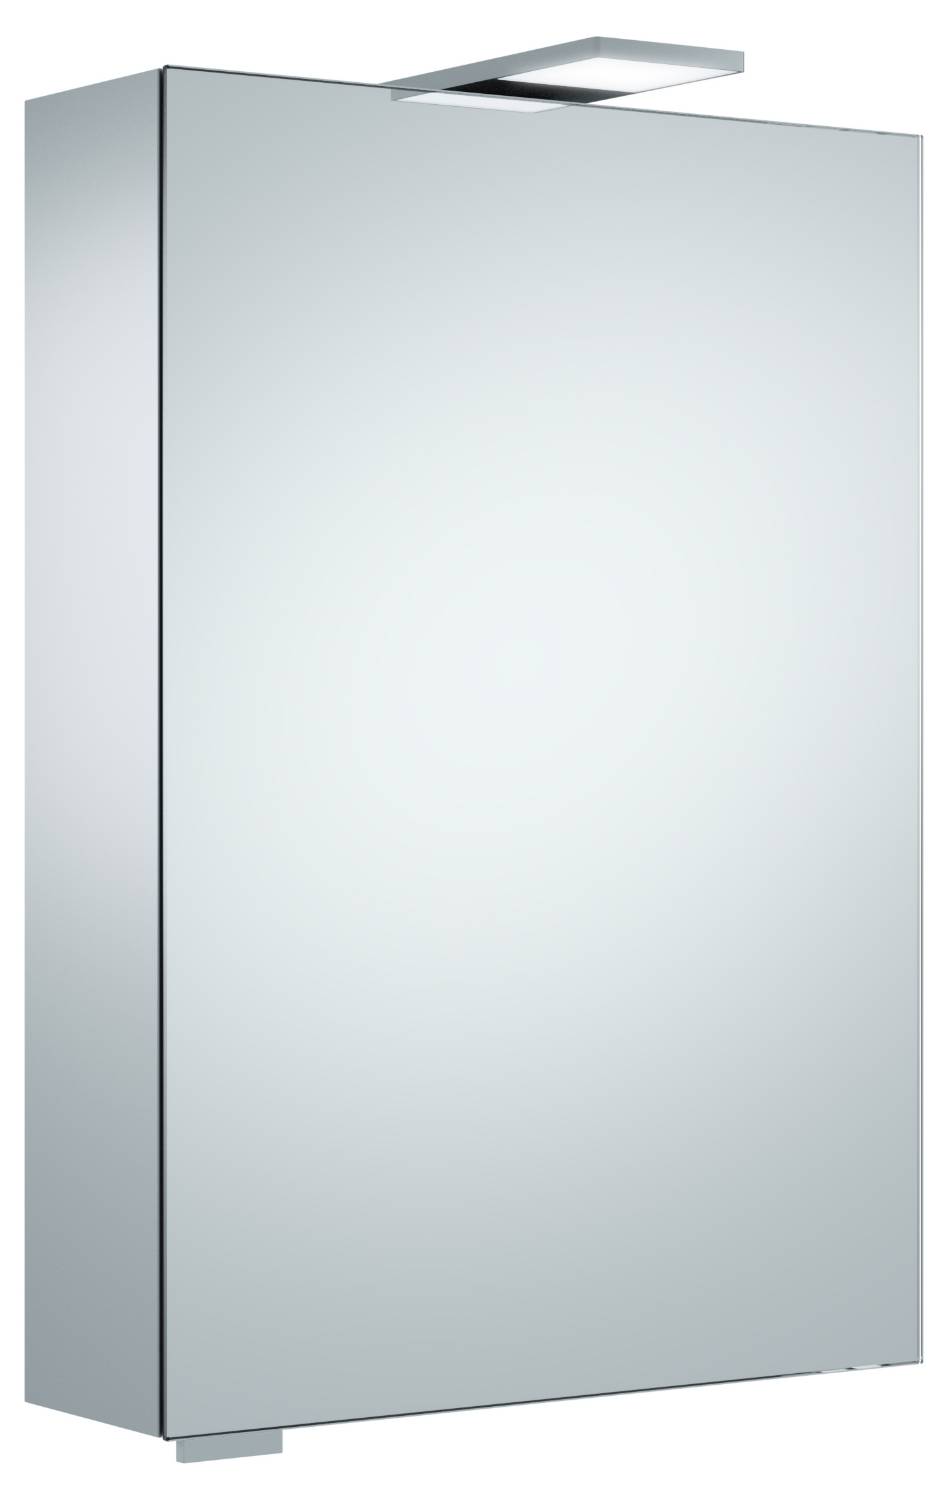 Mirror Cabinet - with Lighting - Wall Mounted - ROYAL 15 - Mirror cabinet